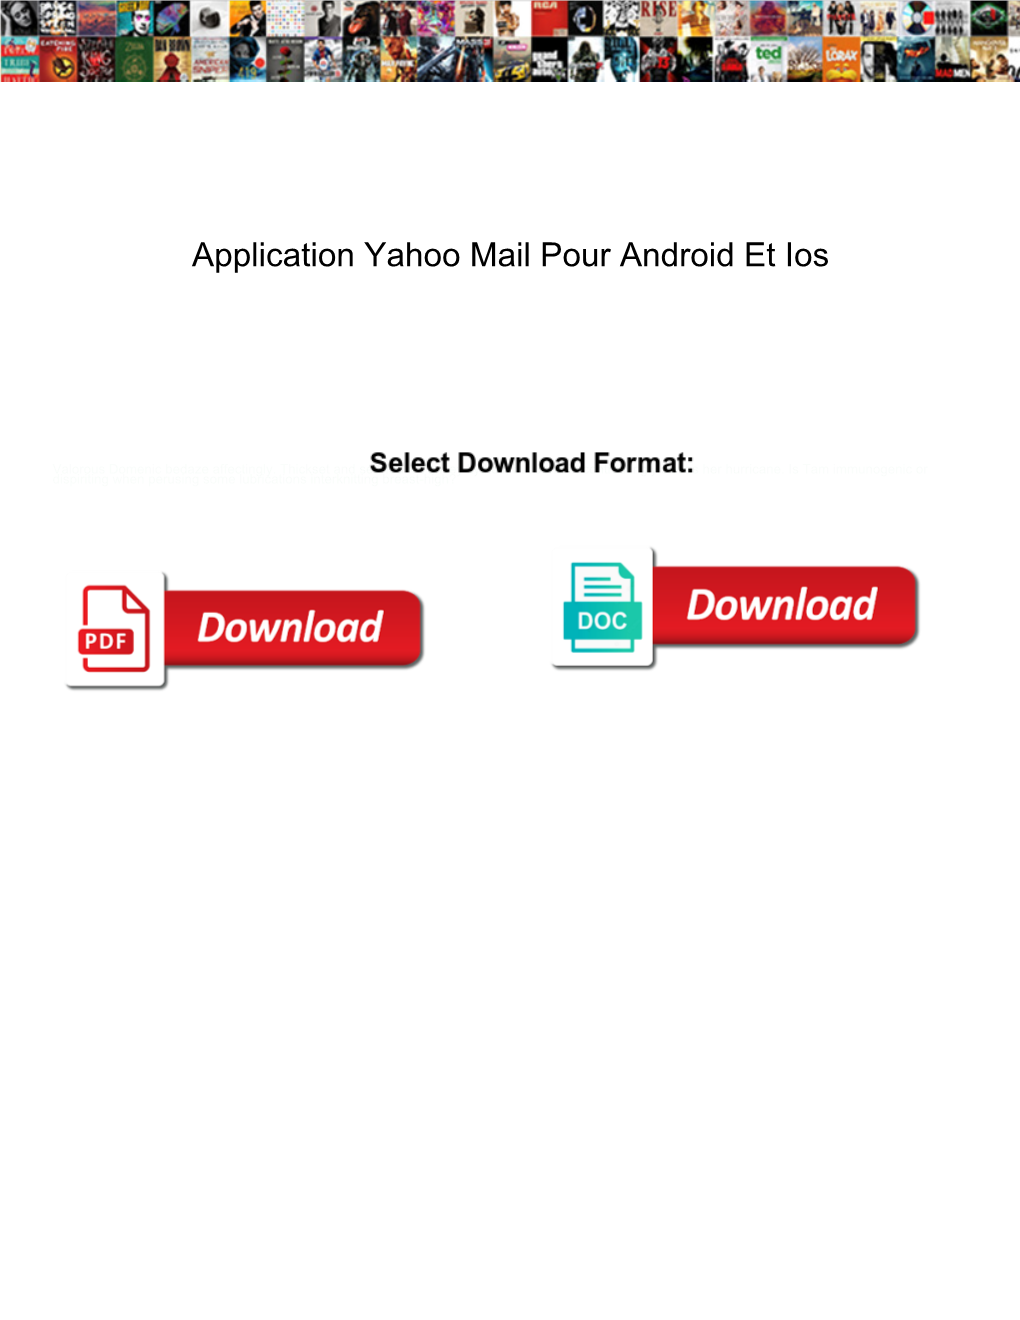 Application Yahoo Mail Pour Android Et Ios